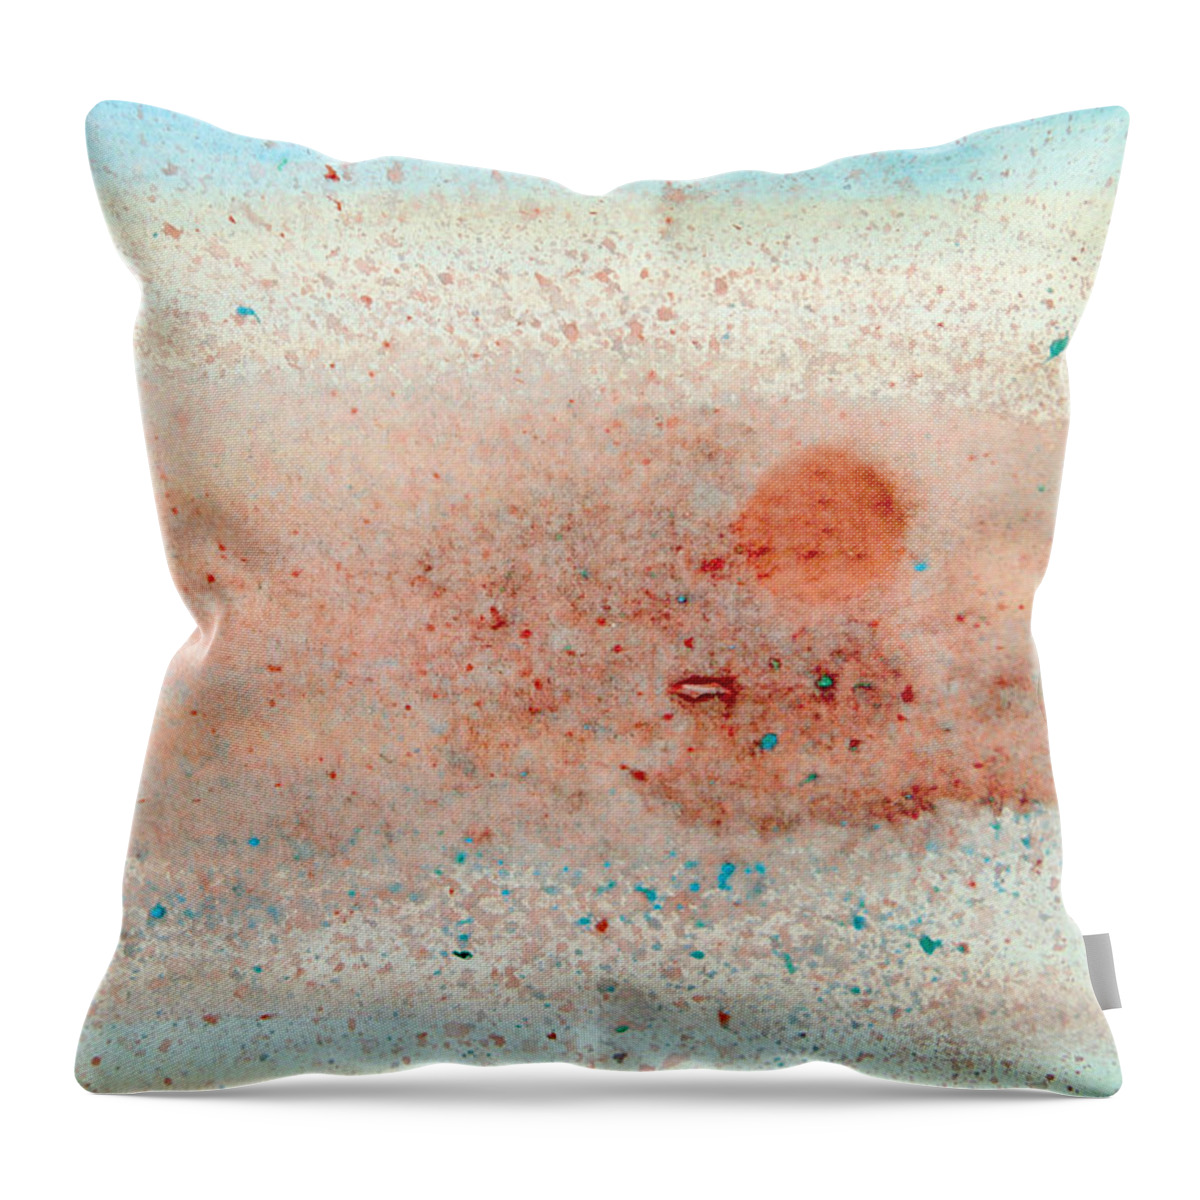 Abstract Throw Pillow featuring the painting Luminous by V.kelly by Valerie Anne Kelly